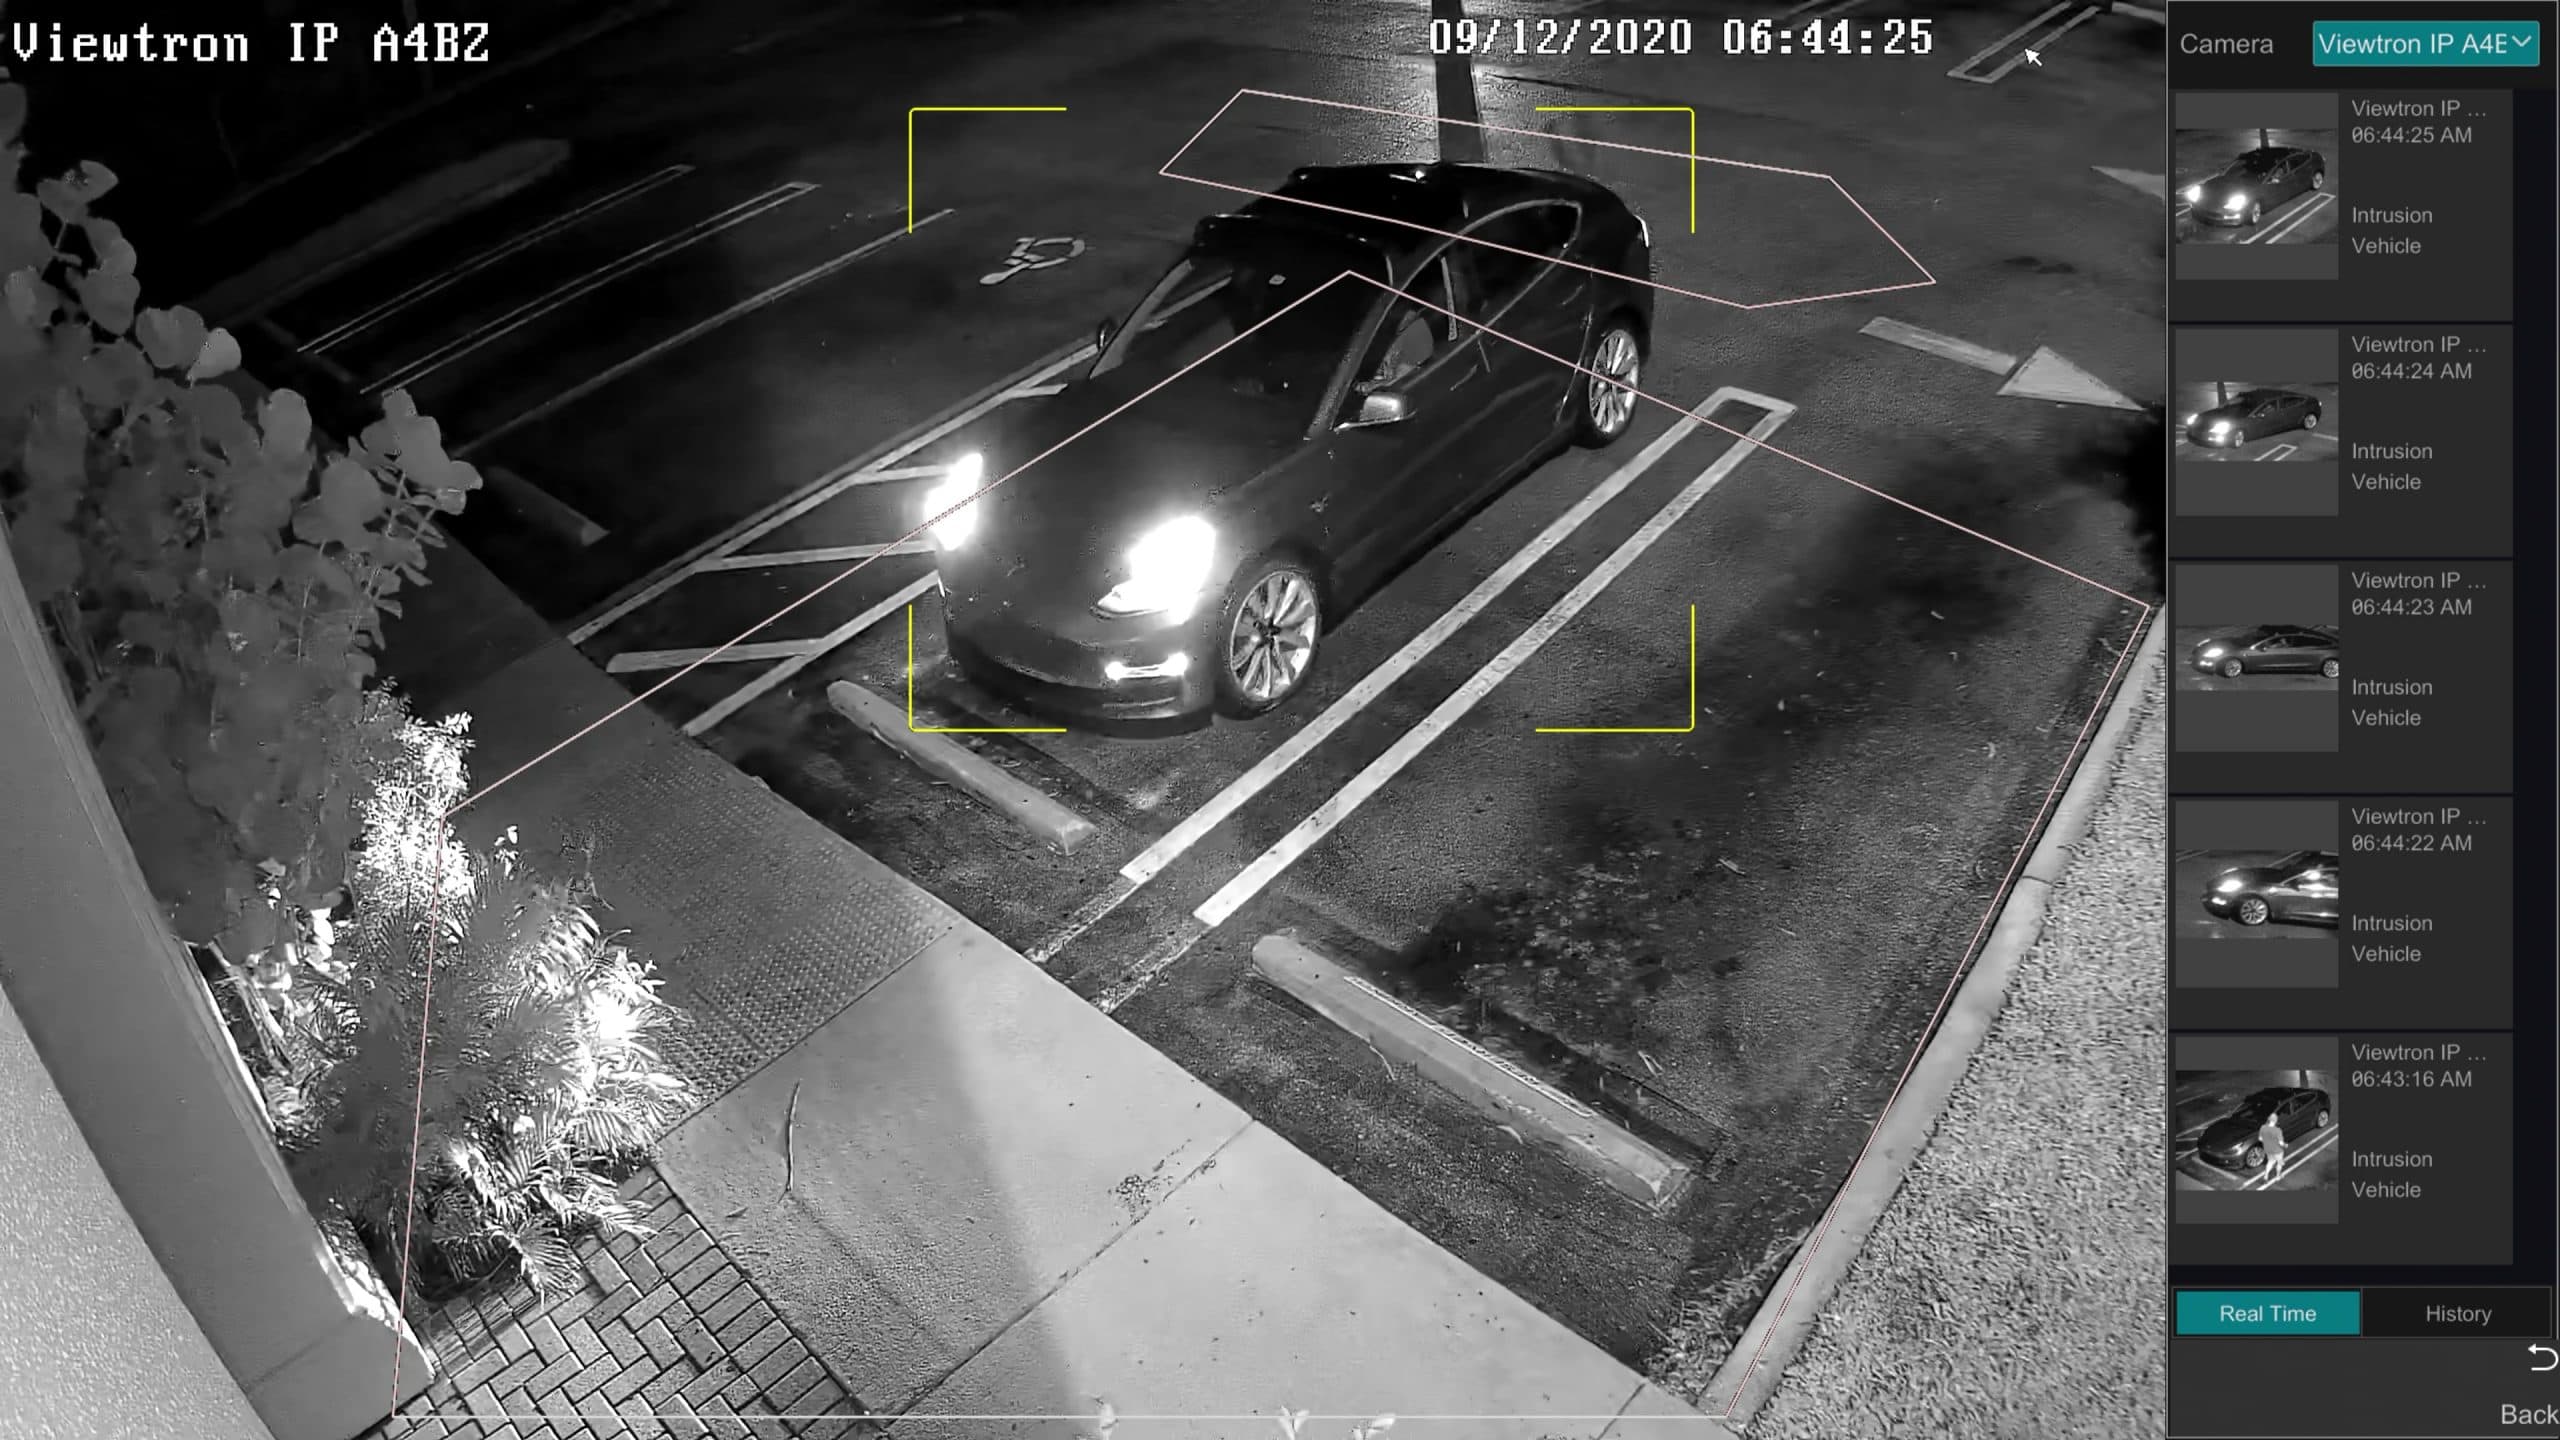 https://videos.cctvcamerapros.com/wp-content/files/vehicle-detection-AI-camera-scaled.jpg